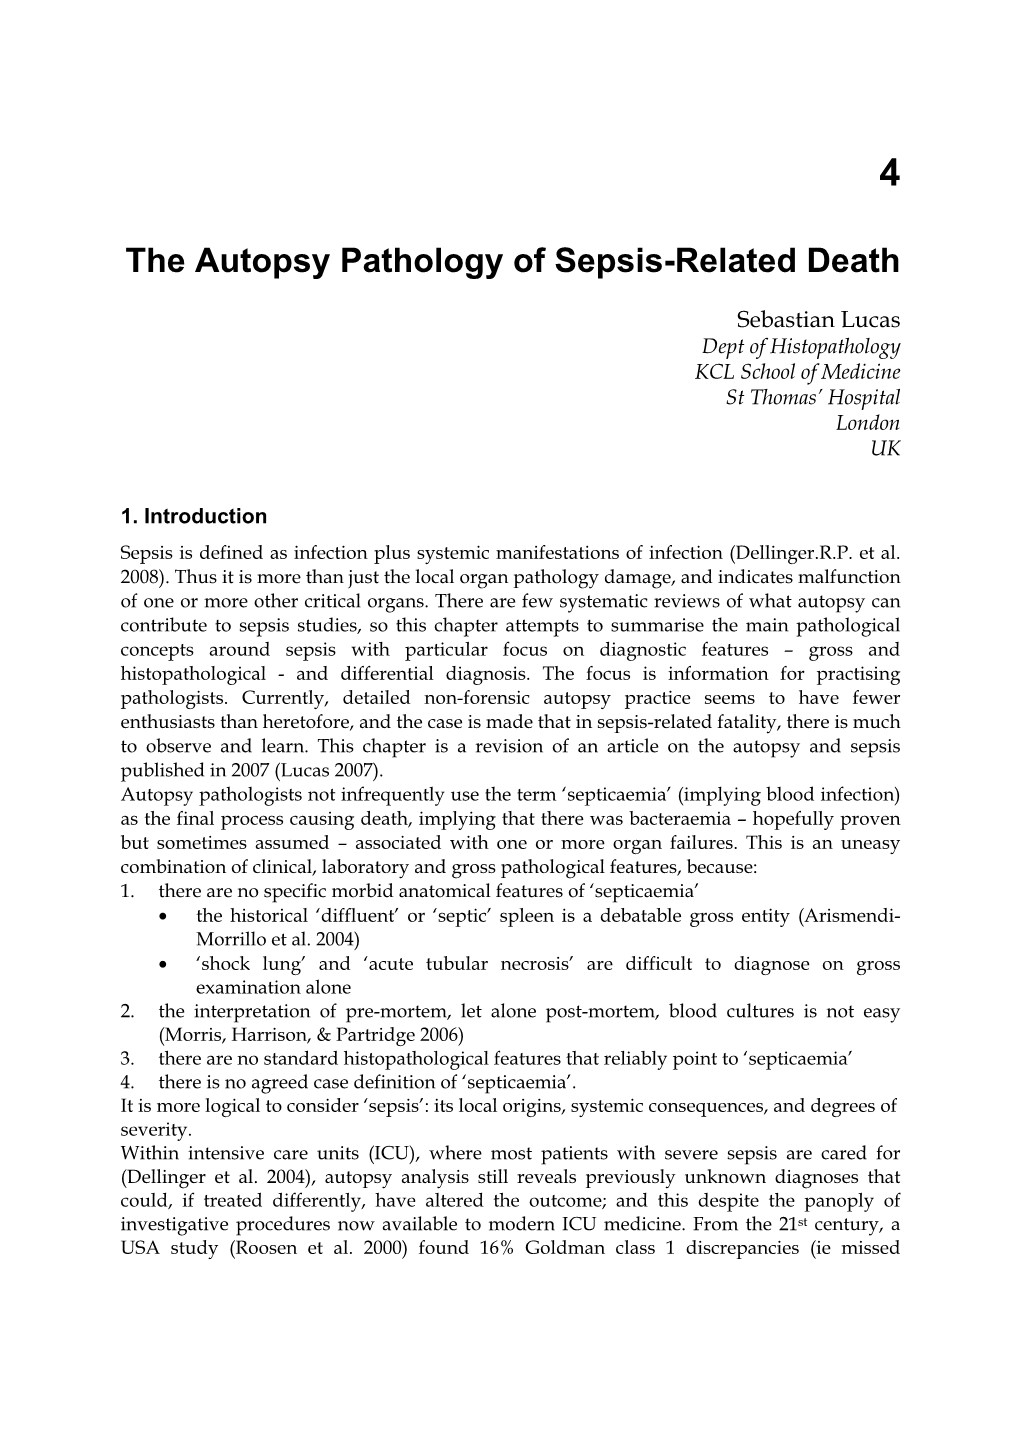 The Autopsy Pathology of Sepsis-Related Death